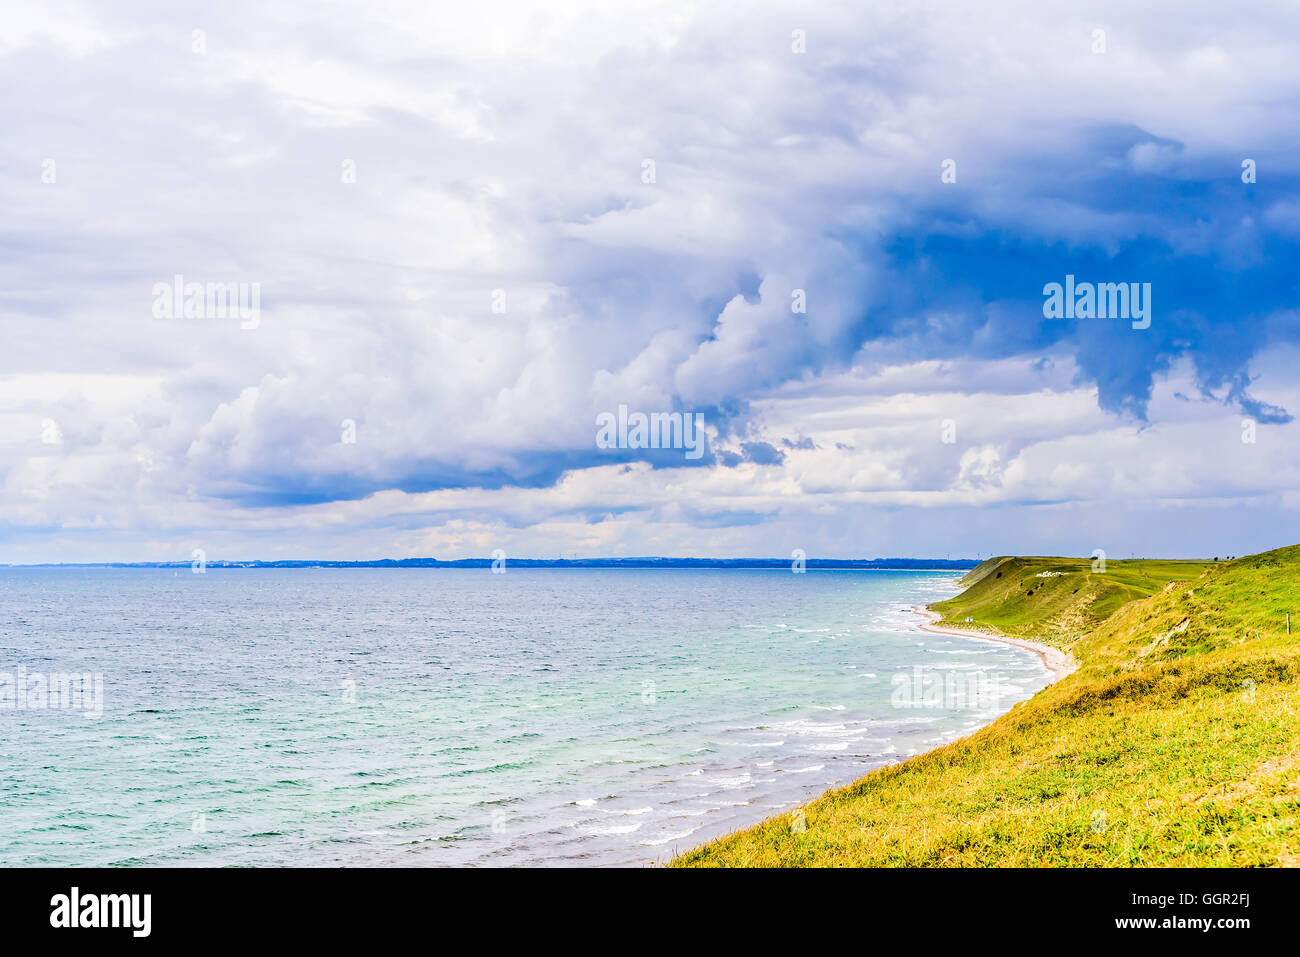 Storm clouds gather over the bay. Steep sandy hills with grass lead up to the grassland above. South coast of Skane, Sweden. Stock Photo